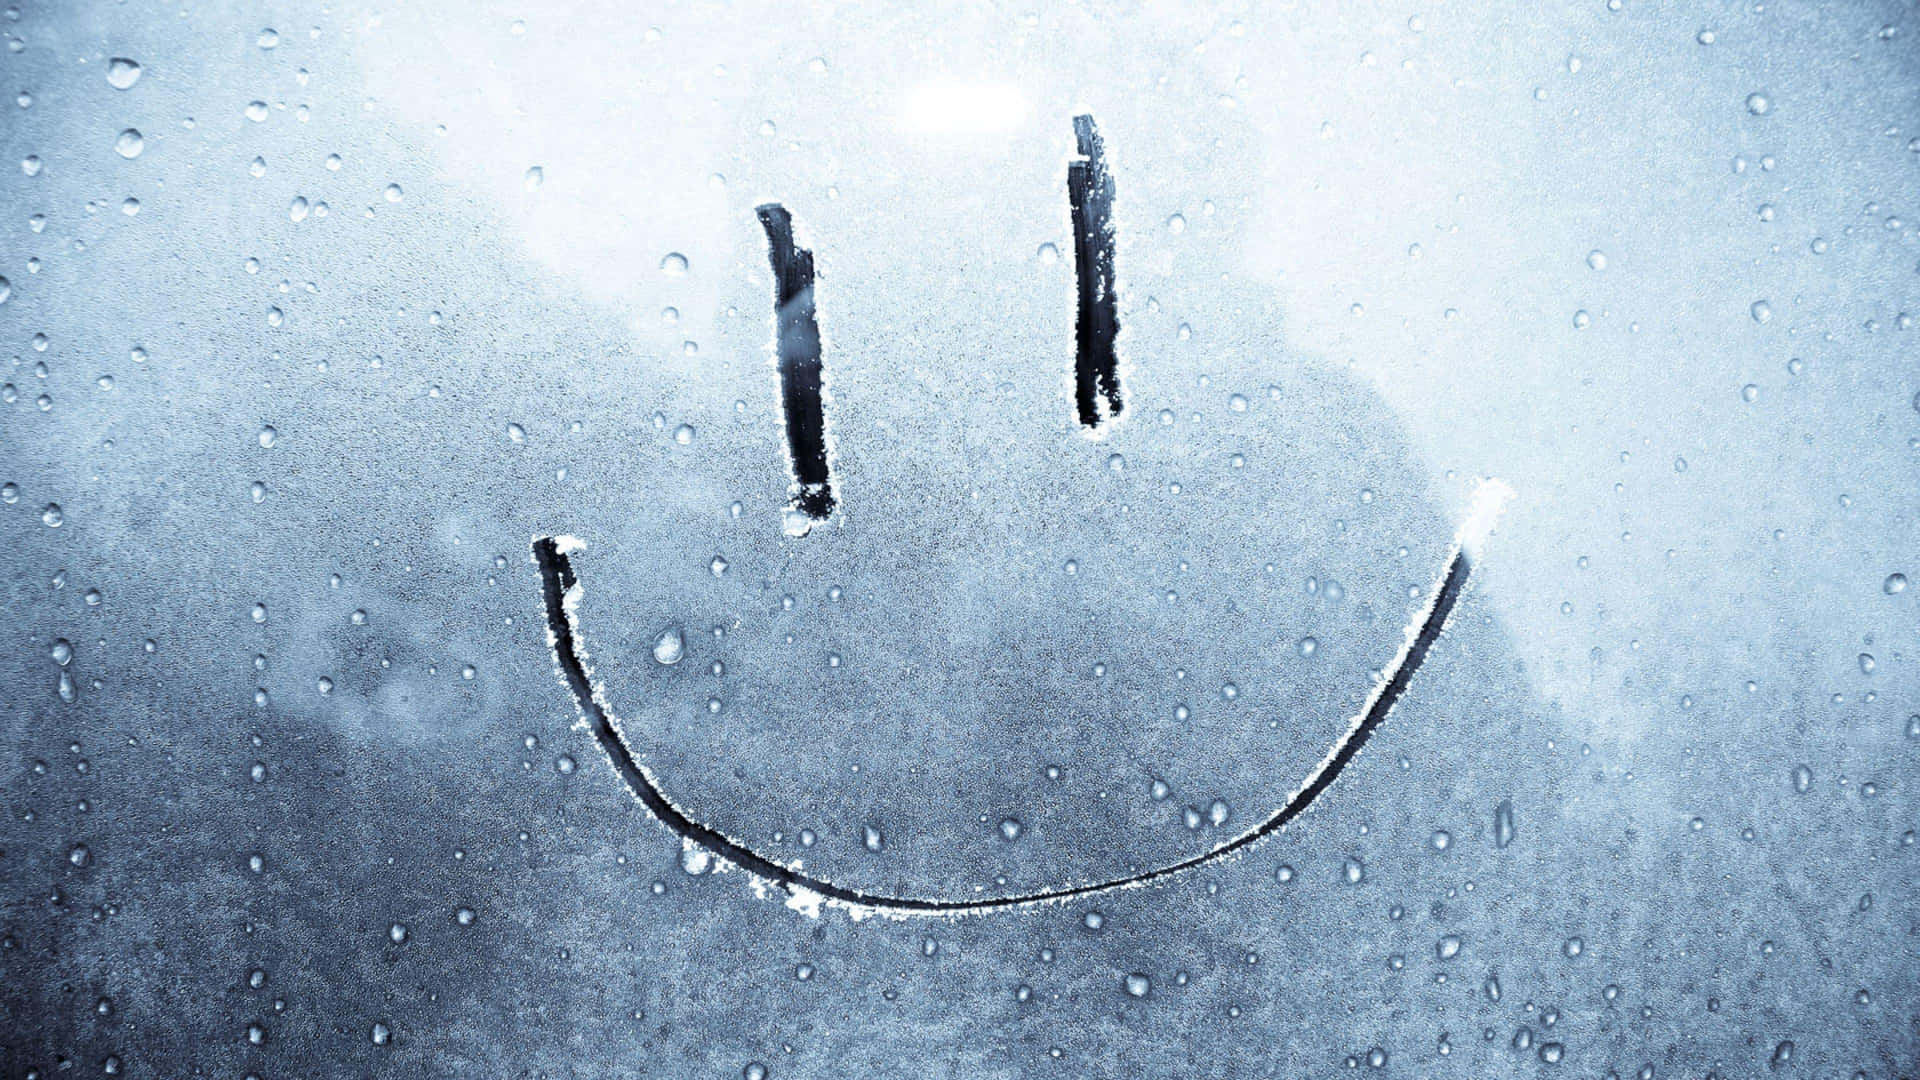 A Smiling Face Drawn On A Window